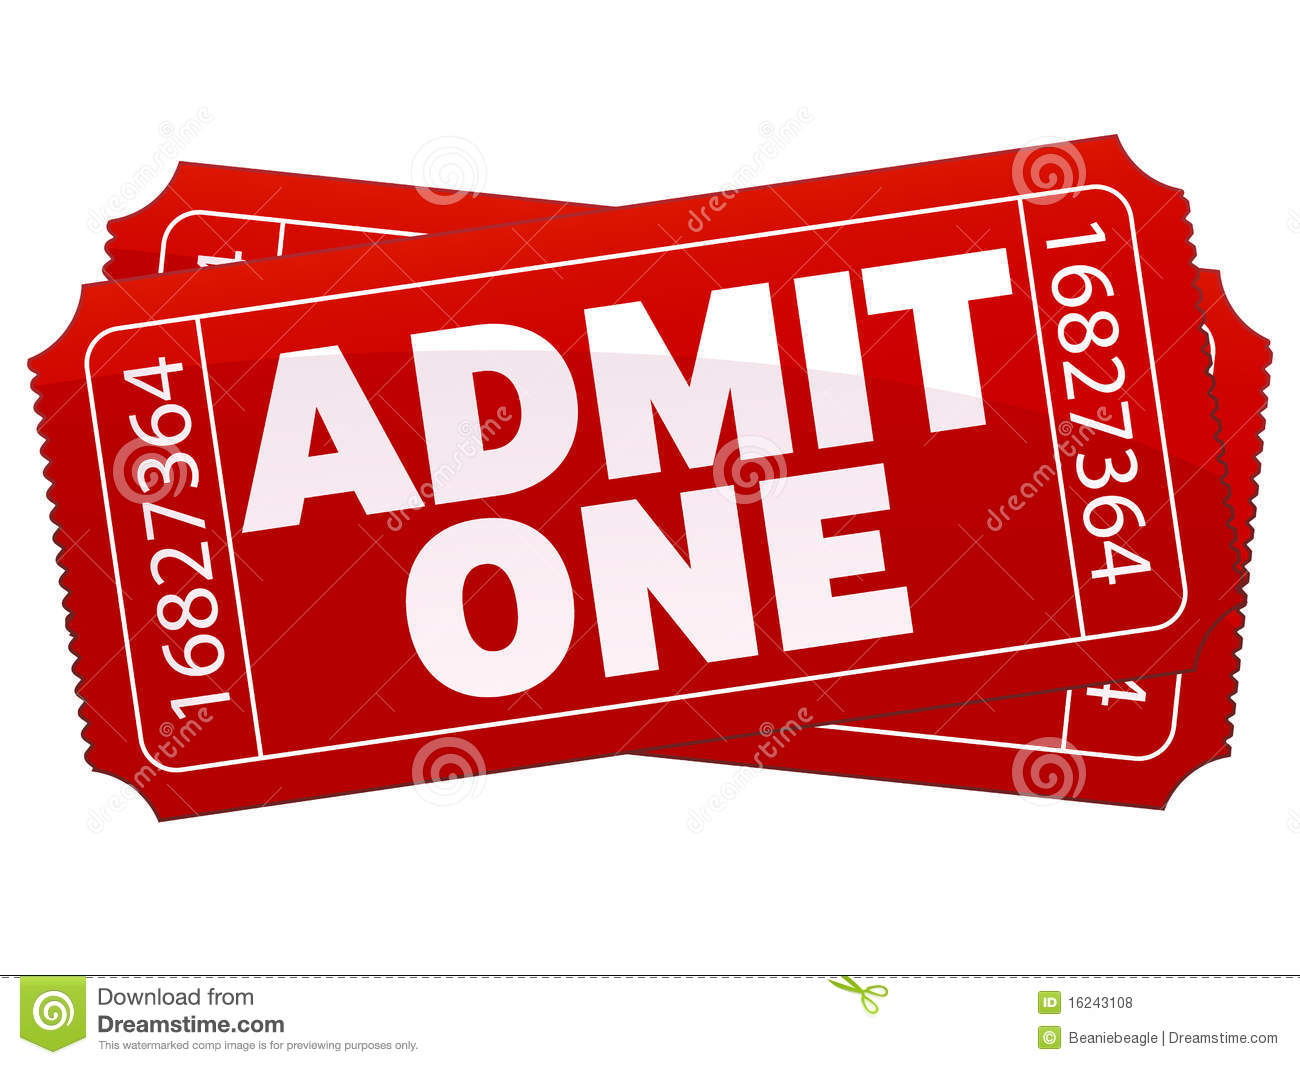 Theater Tickets Royalty Free Stock Photos   Image  16243108